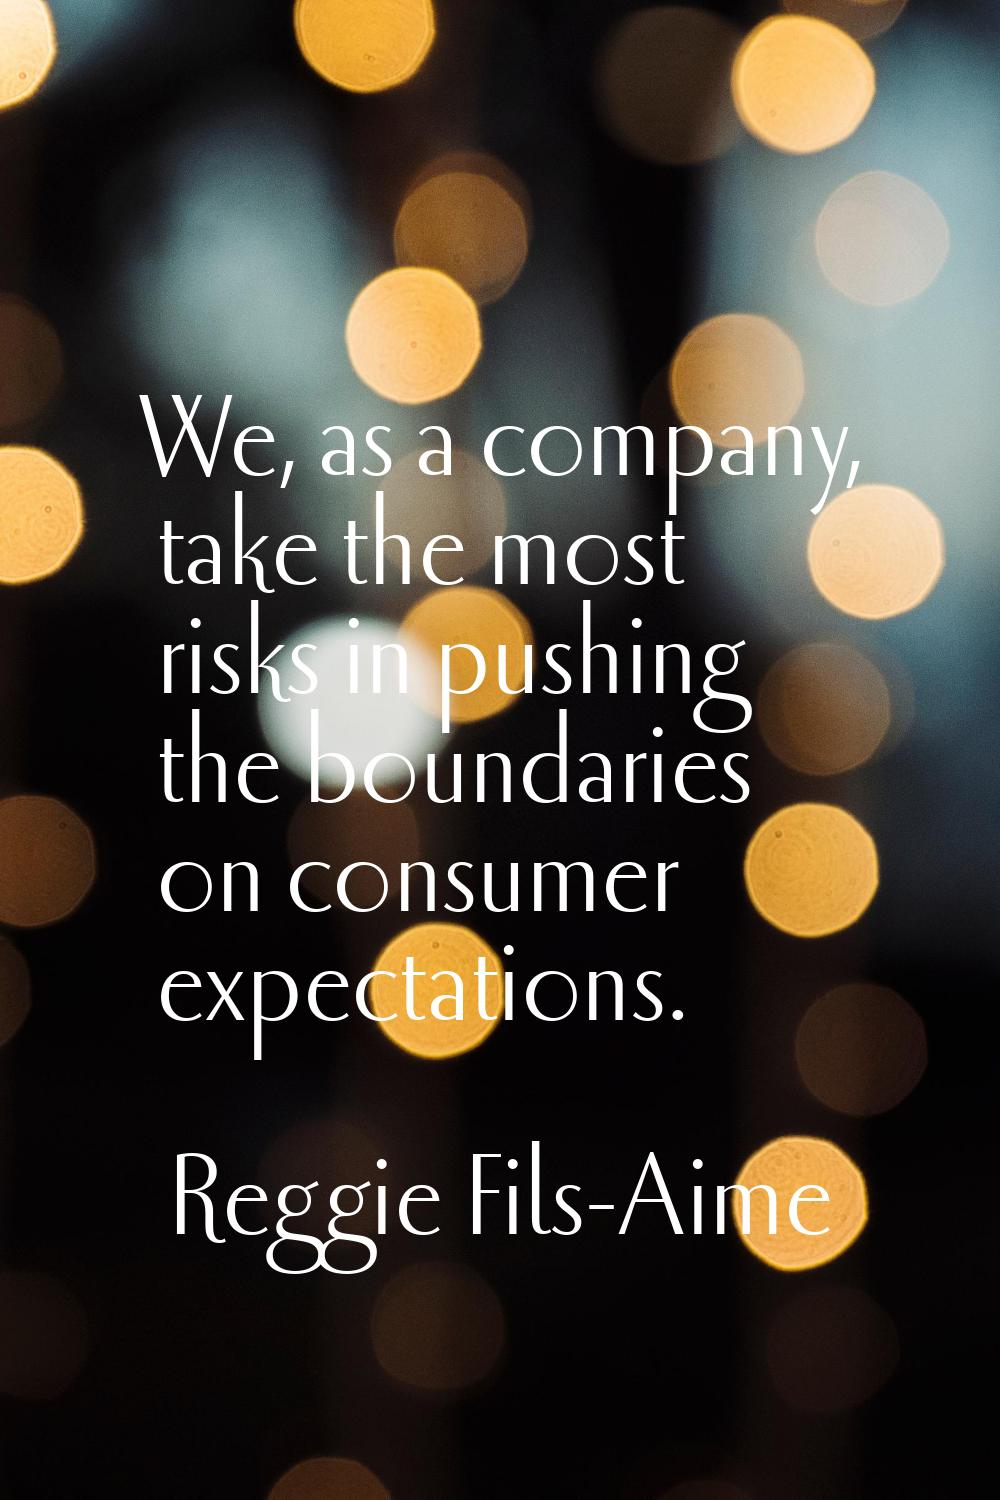 We, as a company, take the most risks in pushing the boundaries on consumer expectations.